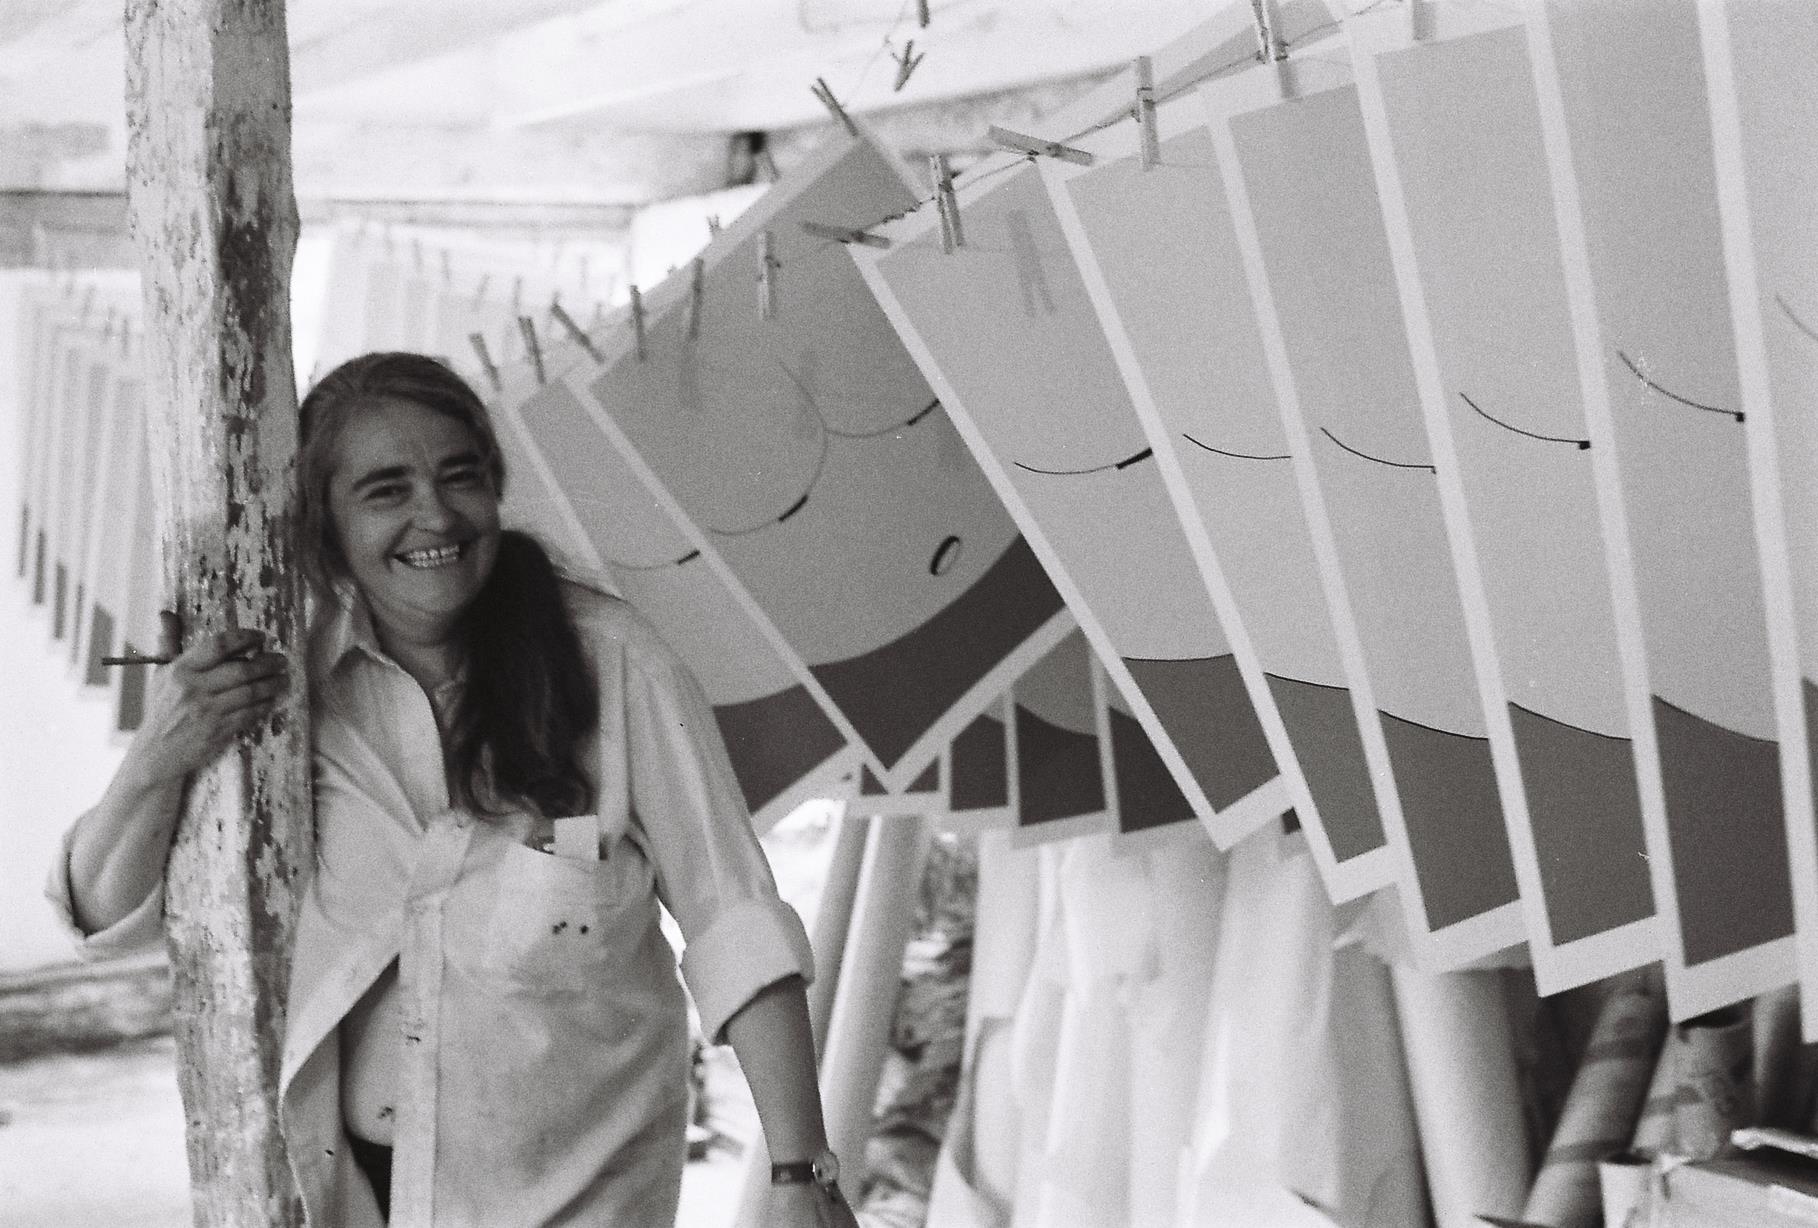 black and white photo of woman showing bellybutton smiling with drying screenprints hang in the foreground